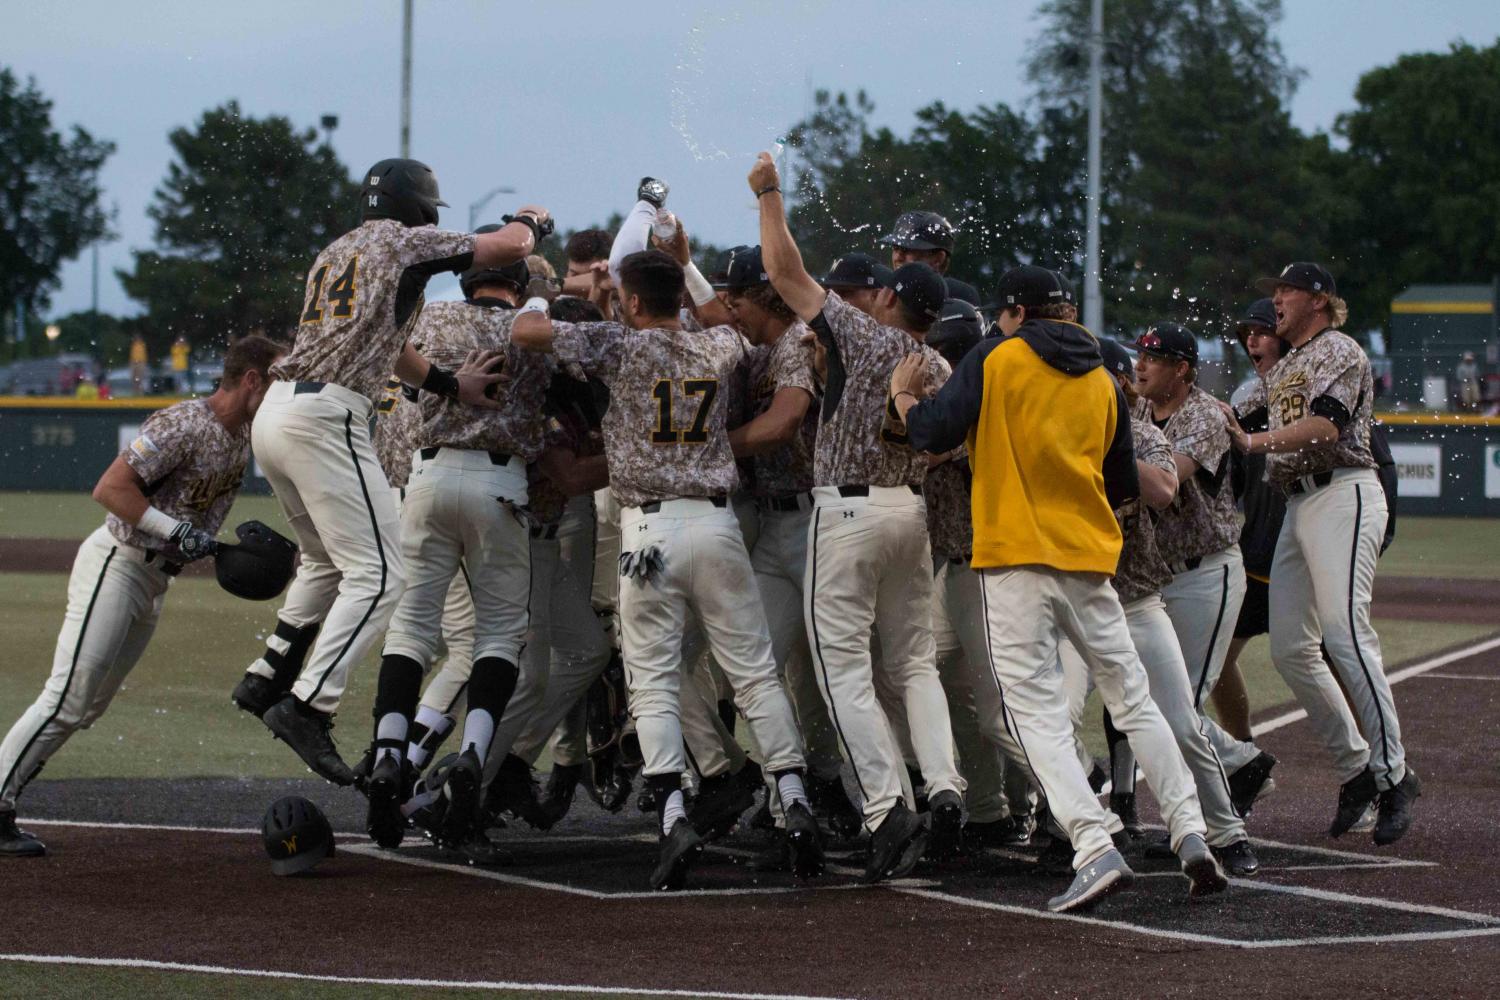 Shockers celebrate after winning their game against K-State Tuesday evening at Eck Stadium. 